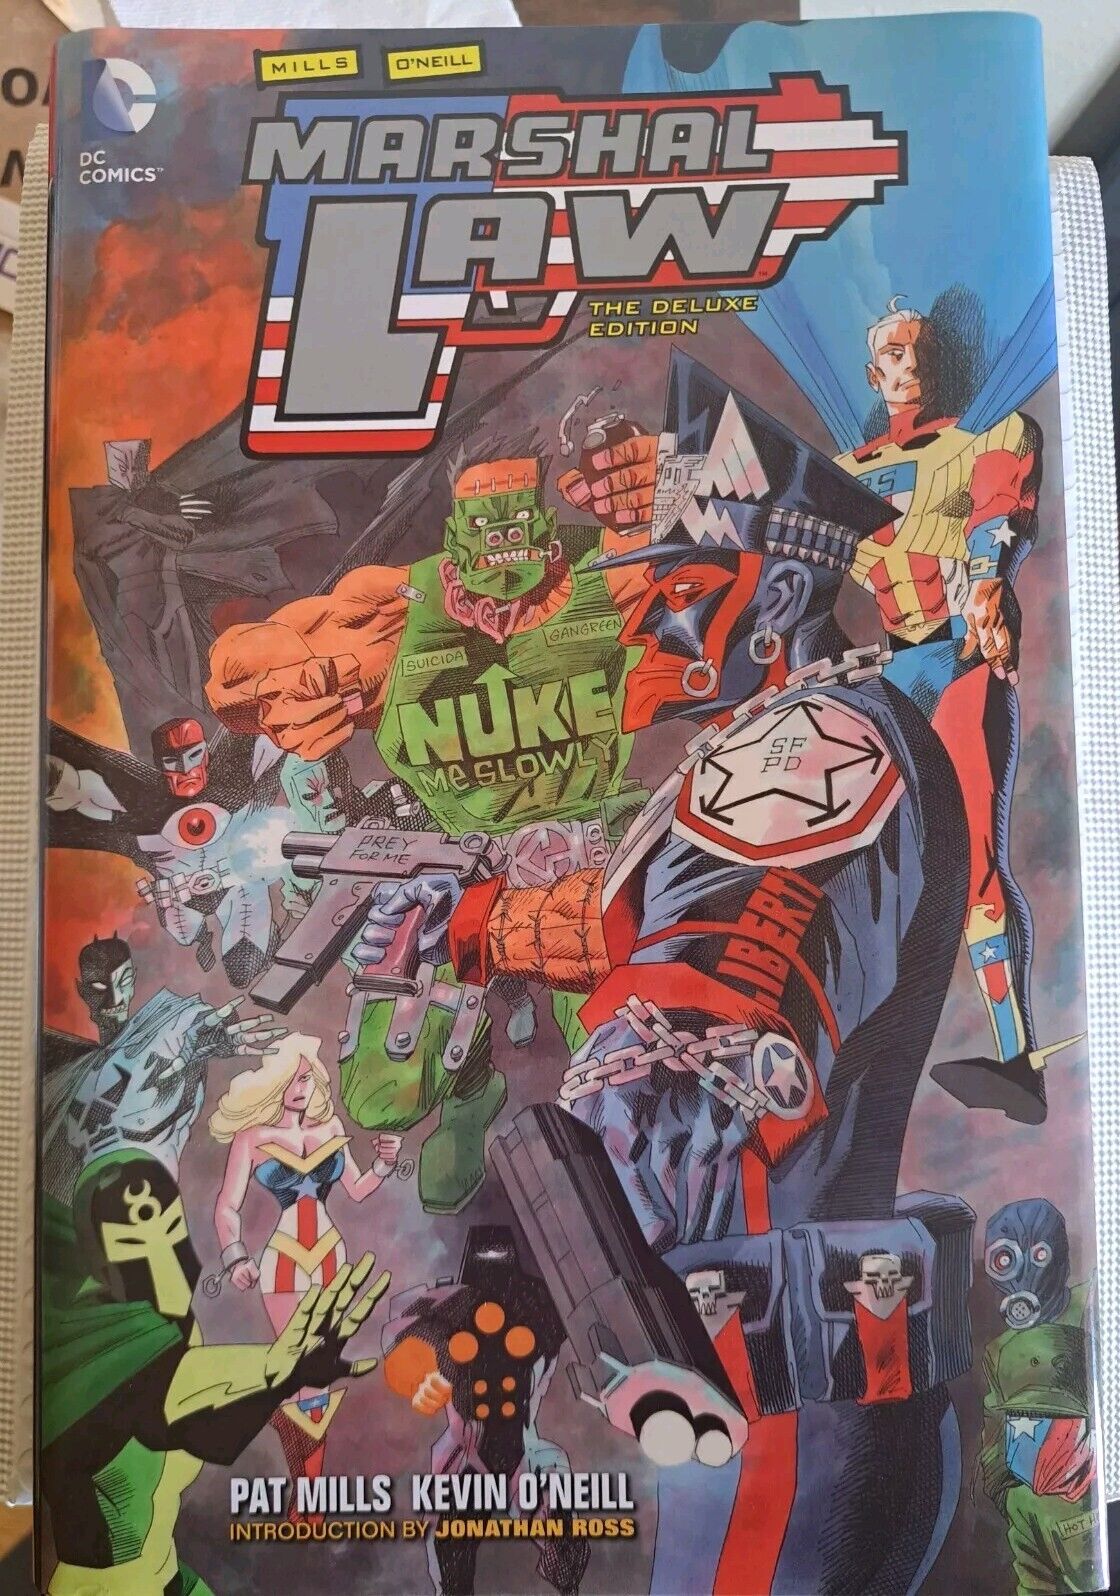 Marshal Law: the Deluxe Edition (DC Comics June 2013) Incredible Condition